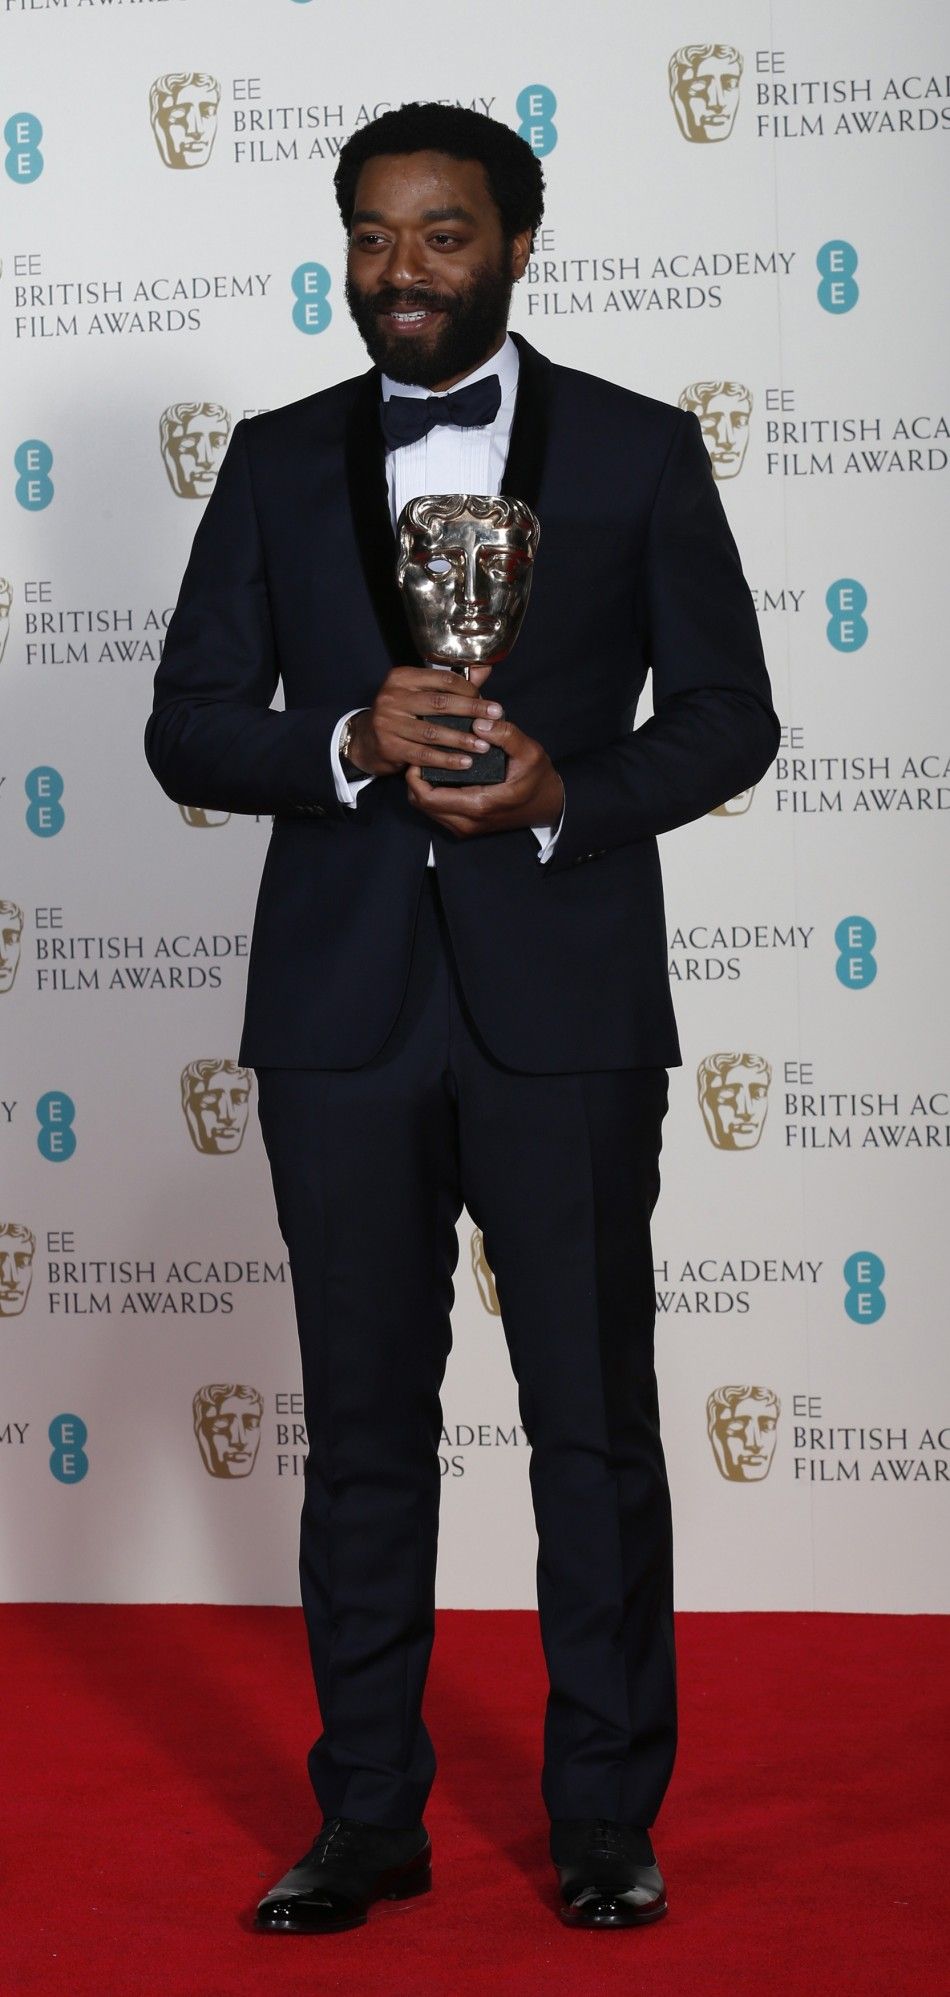 Chiwetel Ejiofor celebrates after winning Best Actor for quot12 Years a Slavequot at the BAFTA awards ceremony in London